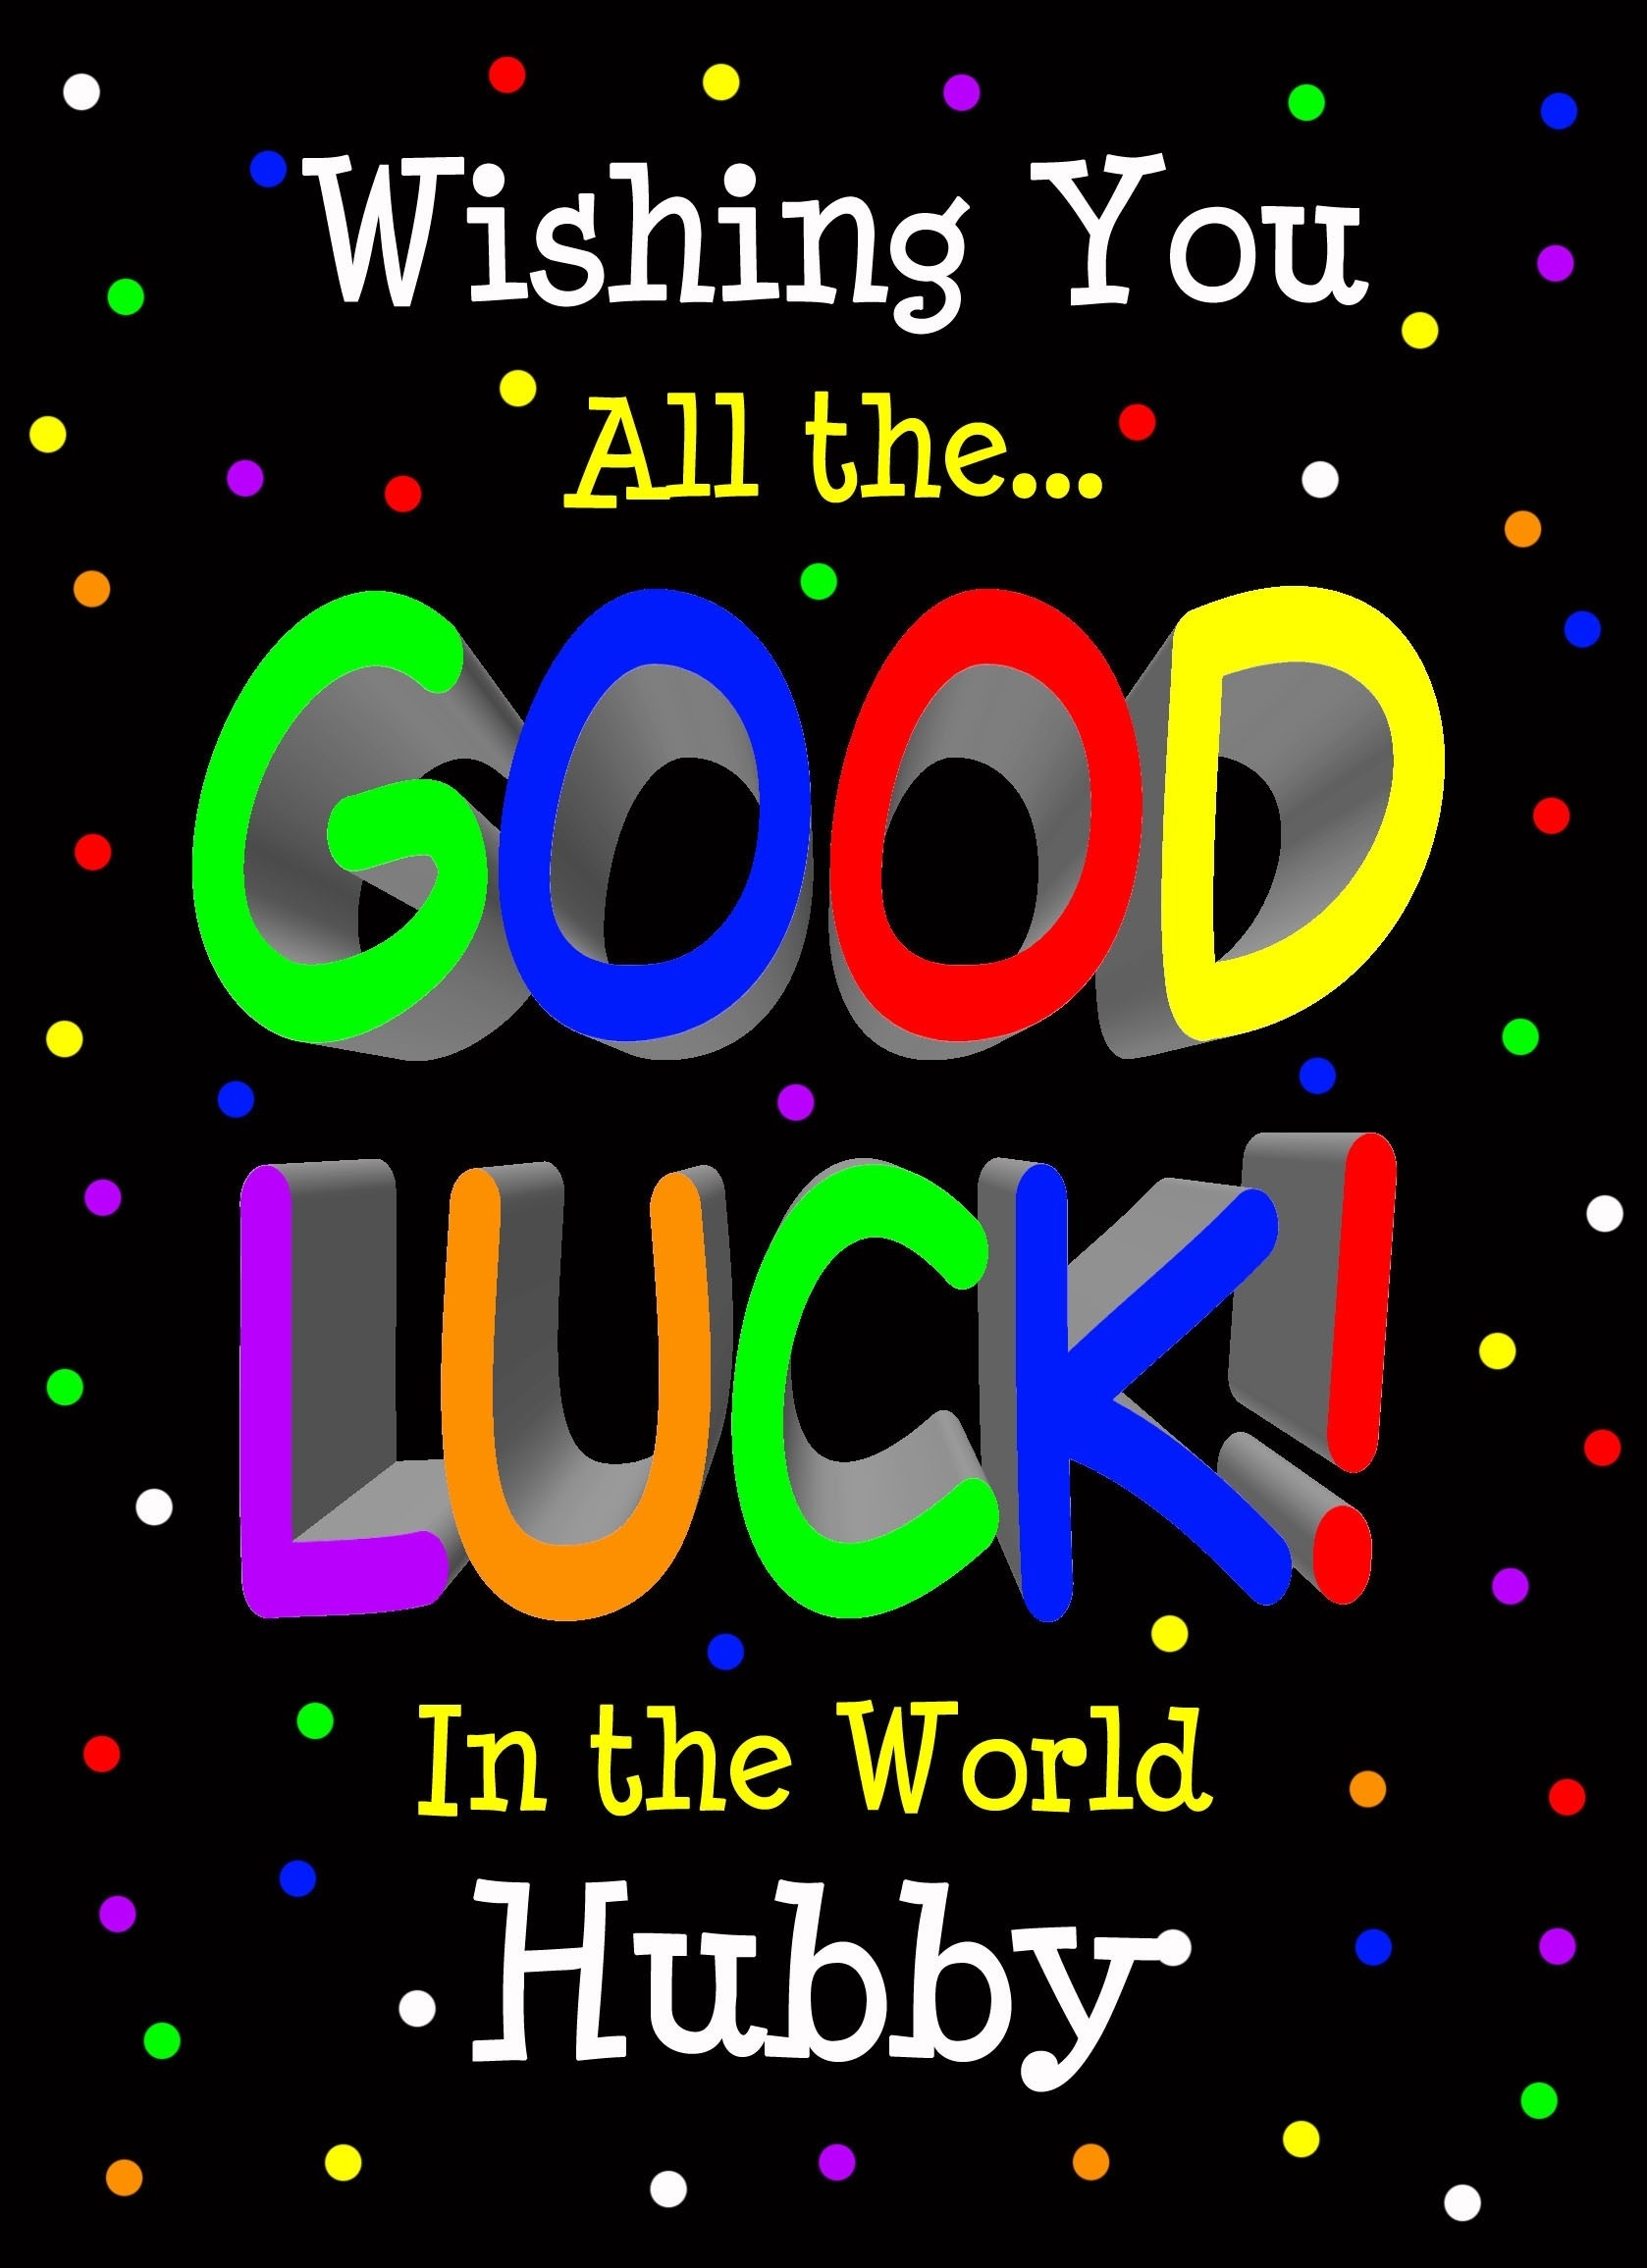 Good Luck Card for Hubby (Black) 